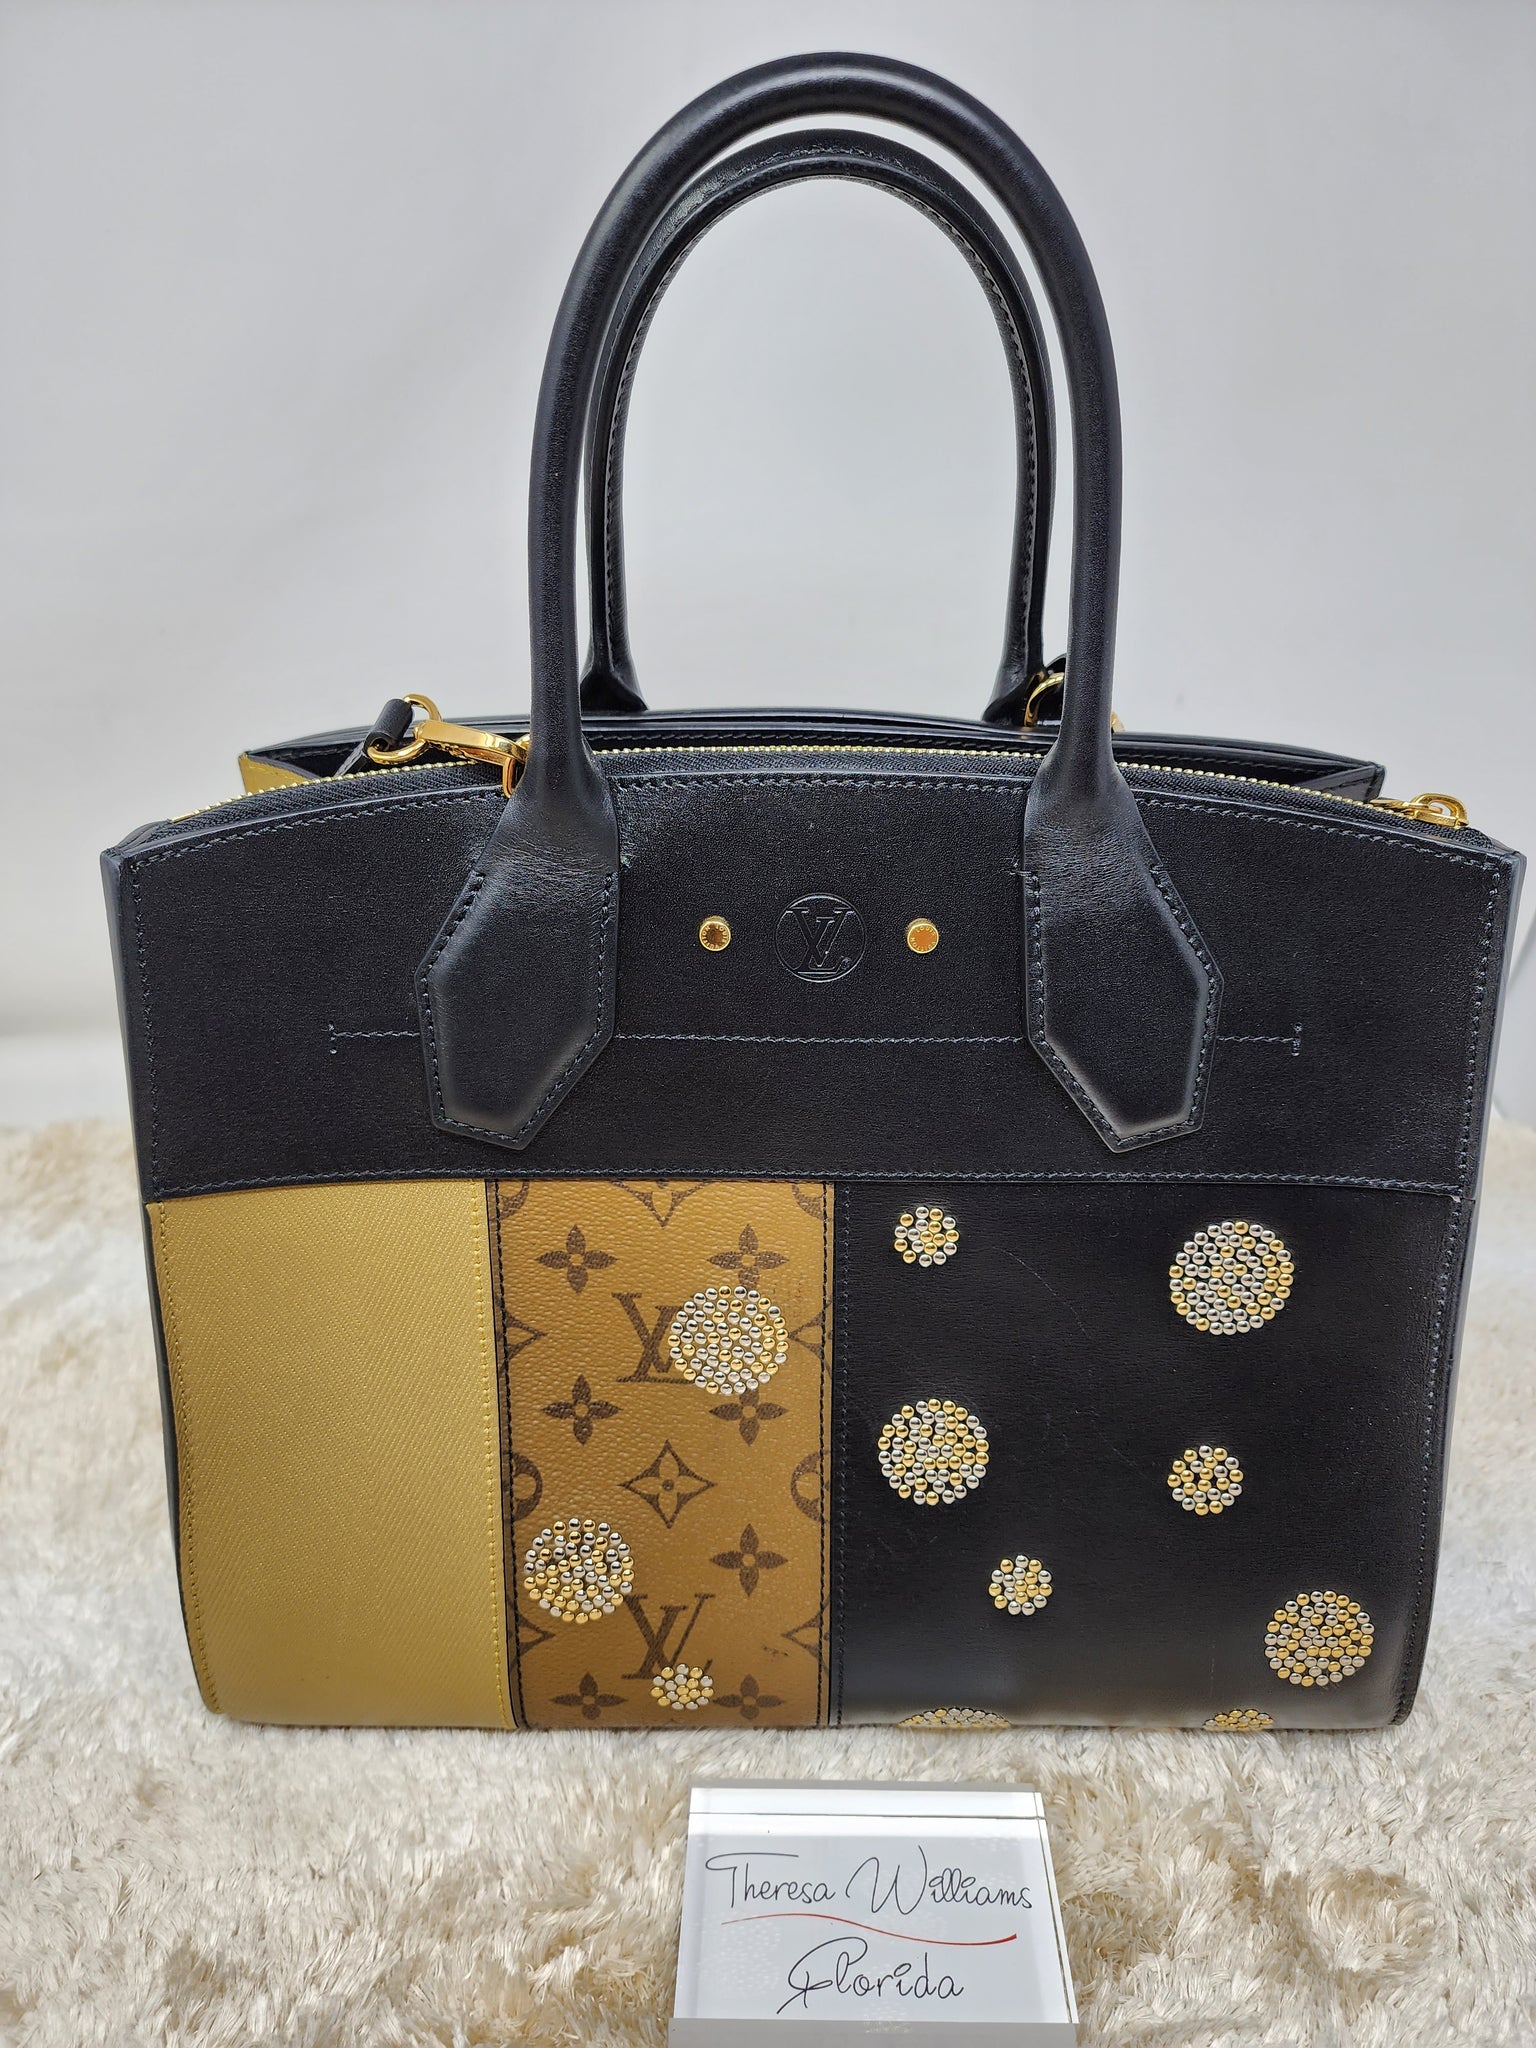 Past auction: A large Louis Vuitton monogrammed leather steamer